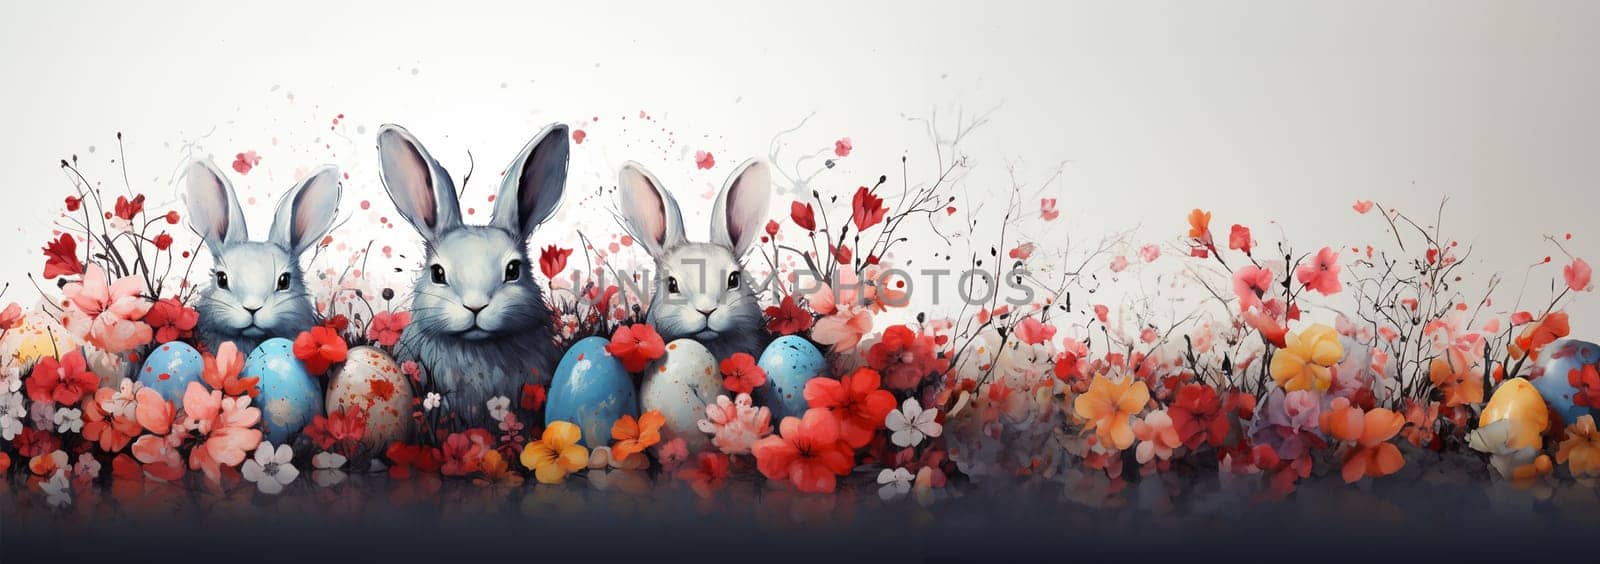 Happy easter! Easter bunny colorful spring flowers. cute classic illustrations of easter eggs in a field of flowers with Easter bunny, nest, bunnies and a festive frame with greeting text for a greeting card, poster or background Copy space